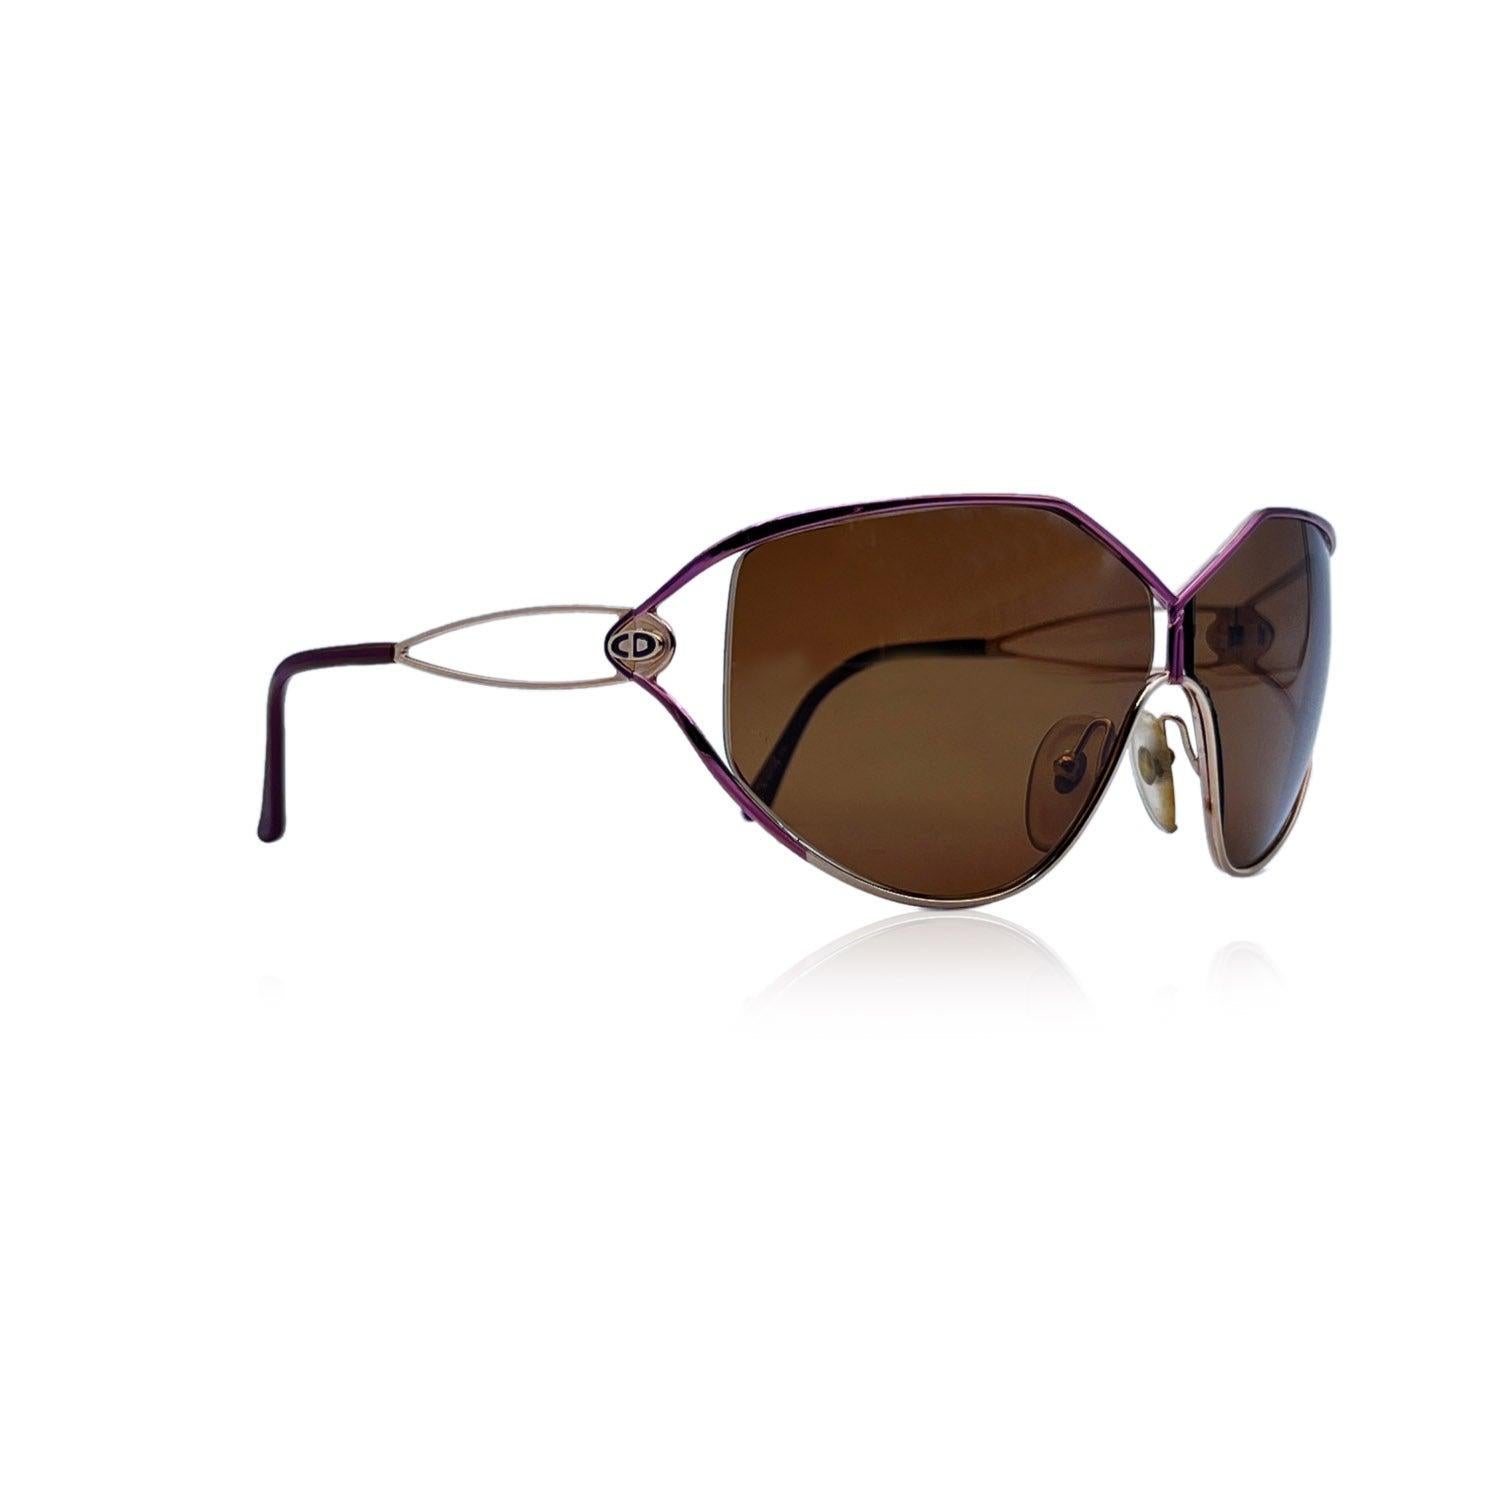 Christian Dior Vintage Sunglasses, Model 2345 - 48 - 64/08 115. Purple and gold metal frame. CD logo on temples. Brown lenses. Made in Austria.


Condition

A+ - MINT

NEW OLD STOCK - Never worn or used-

Details

MATERIAL: Metal

COLOR: